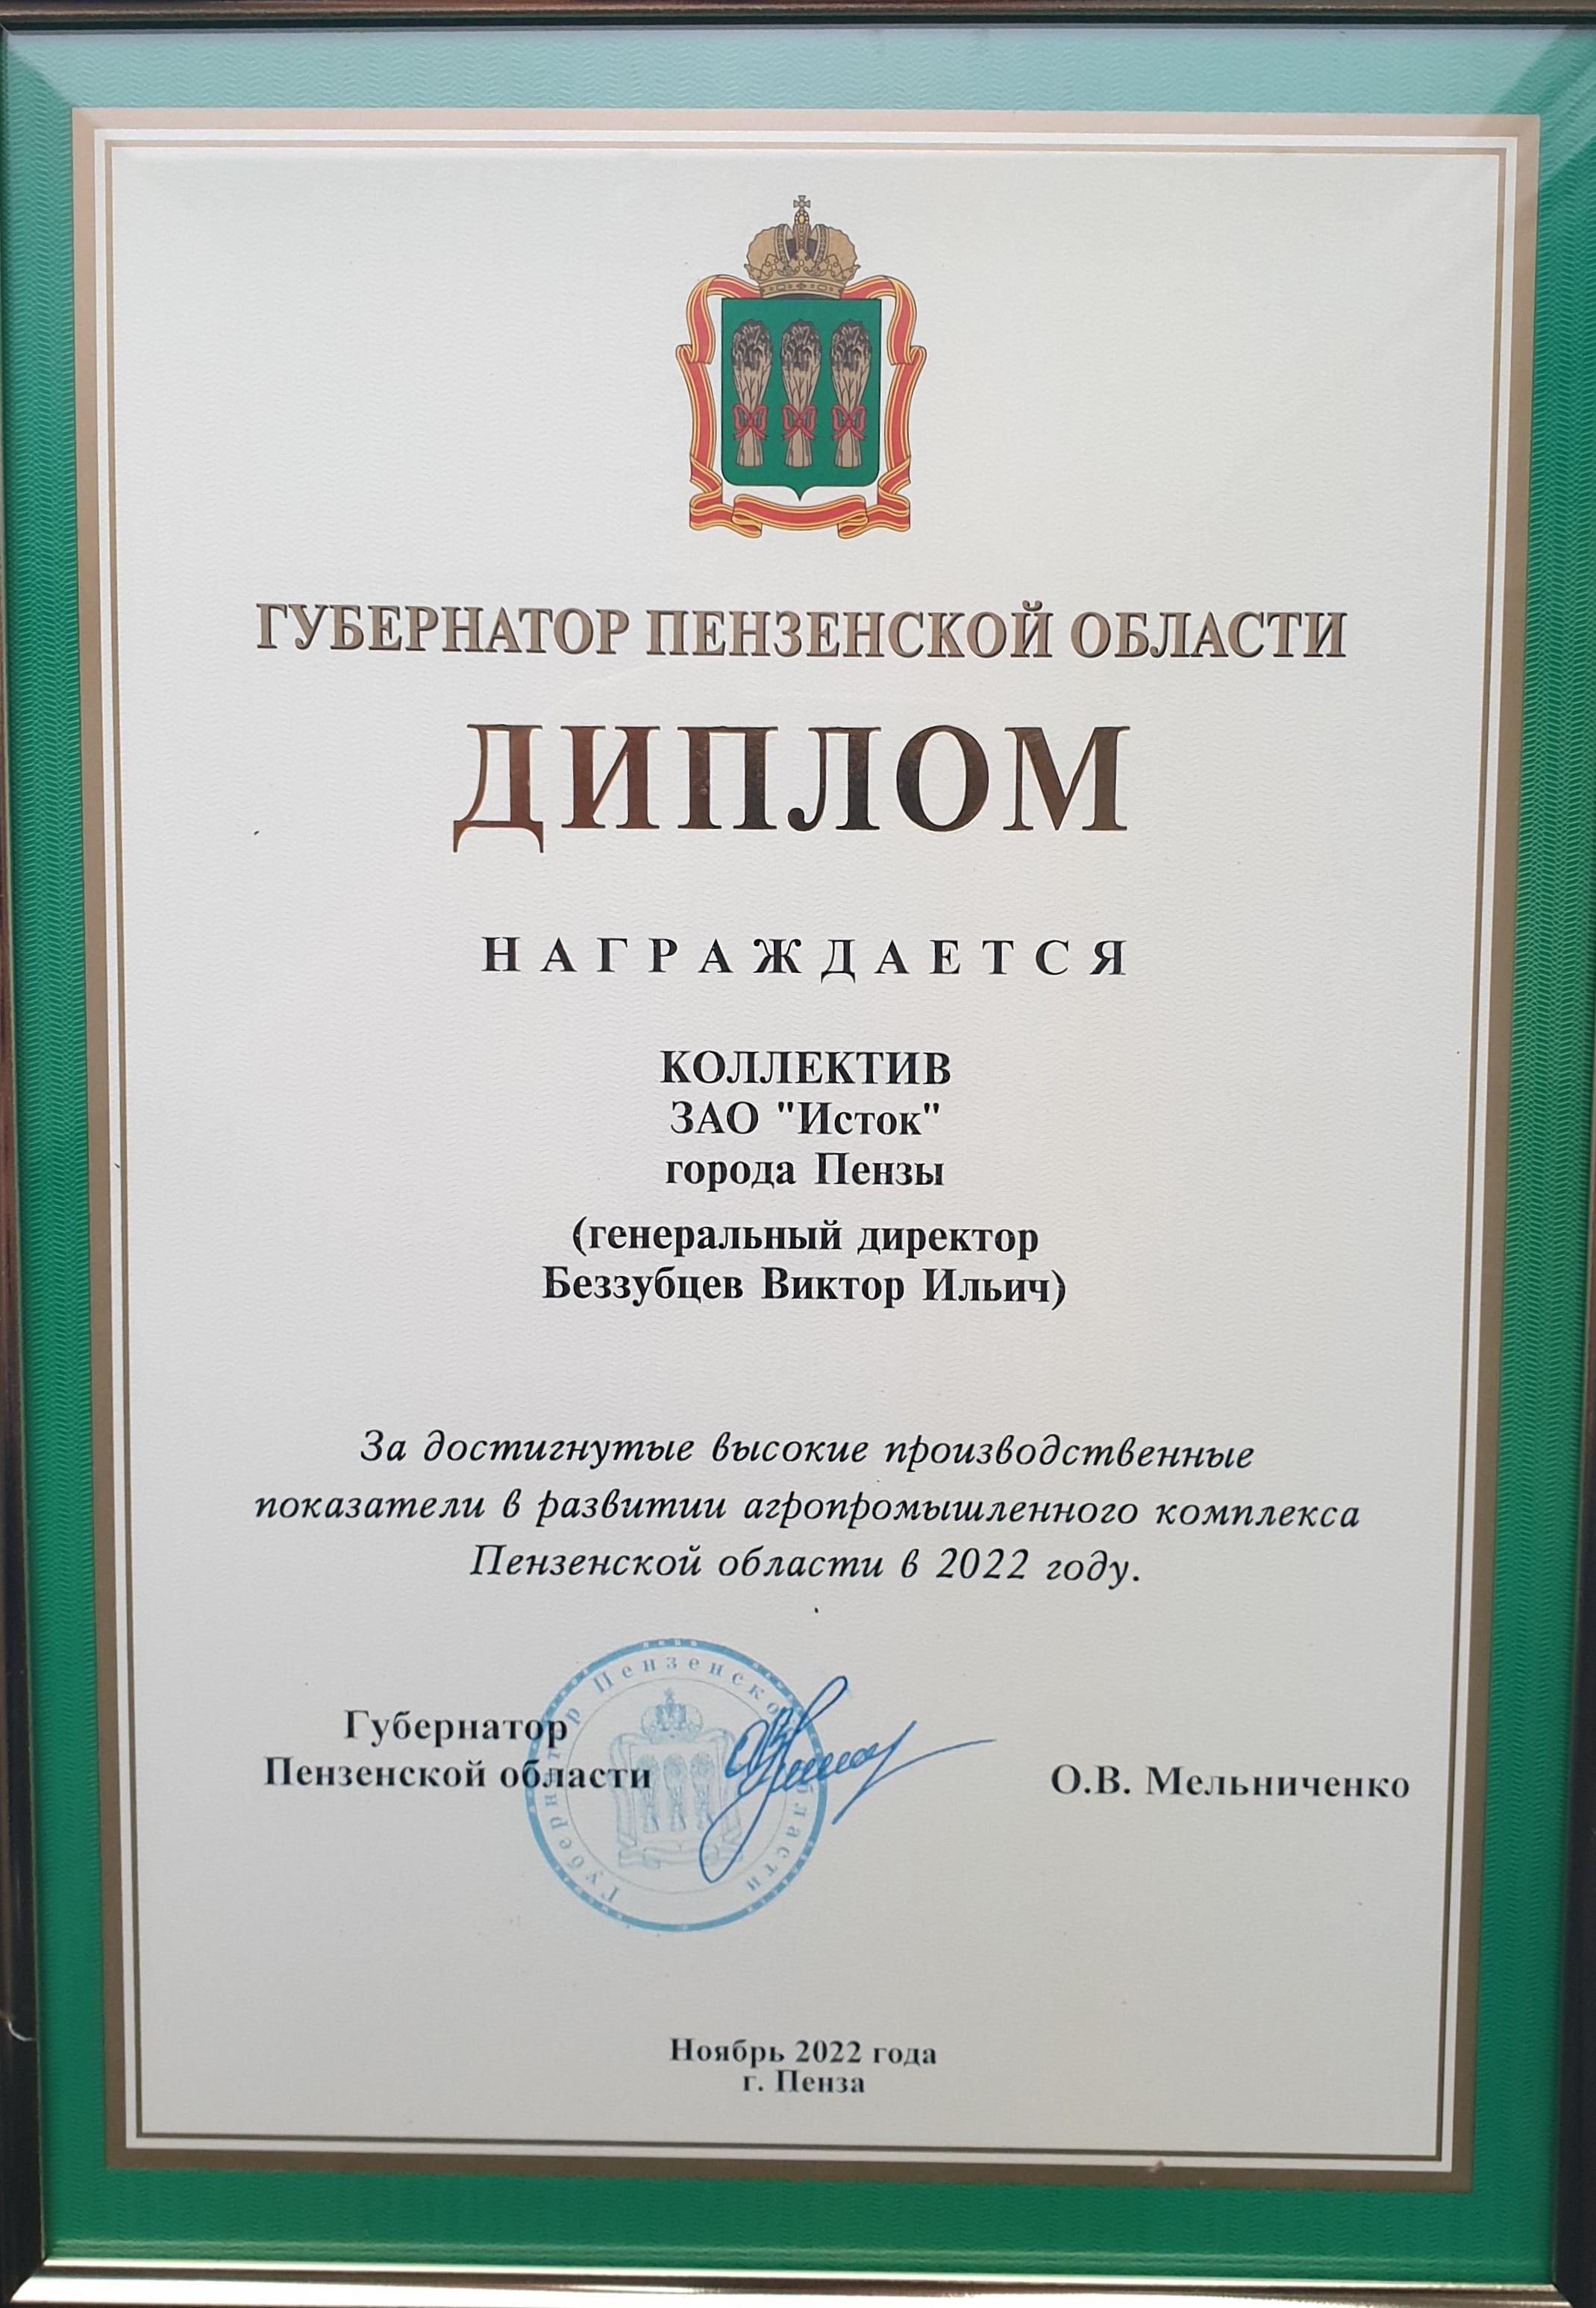 Istok named the best company (by Ministry of agriculture)